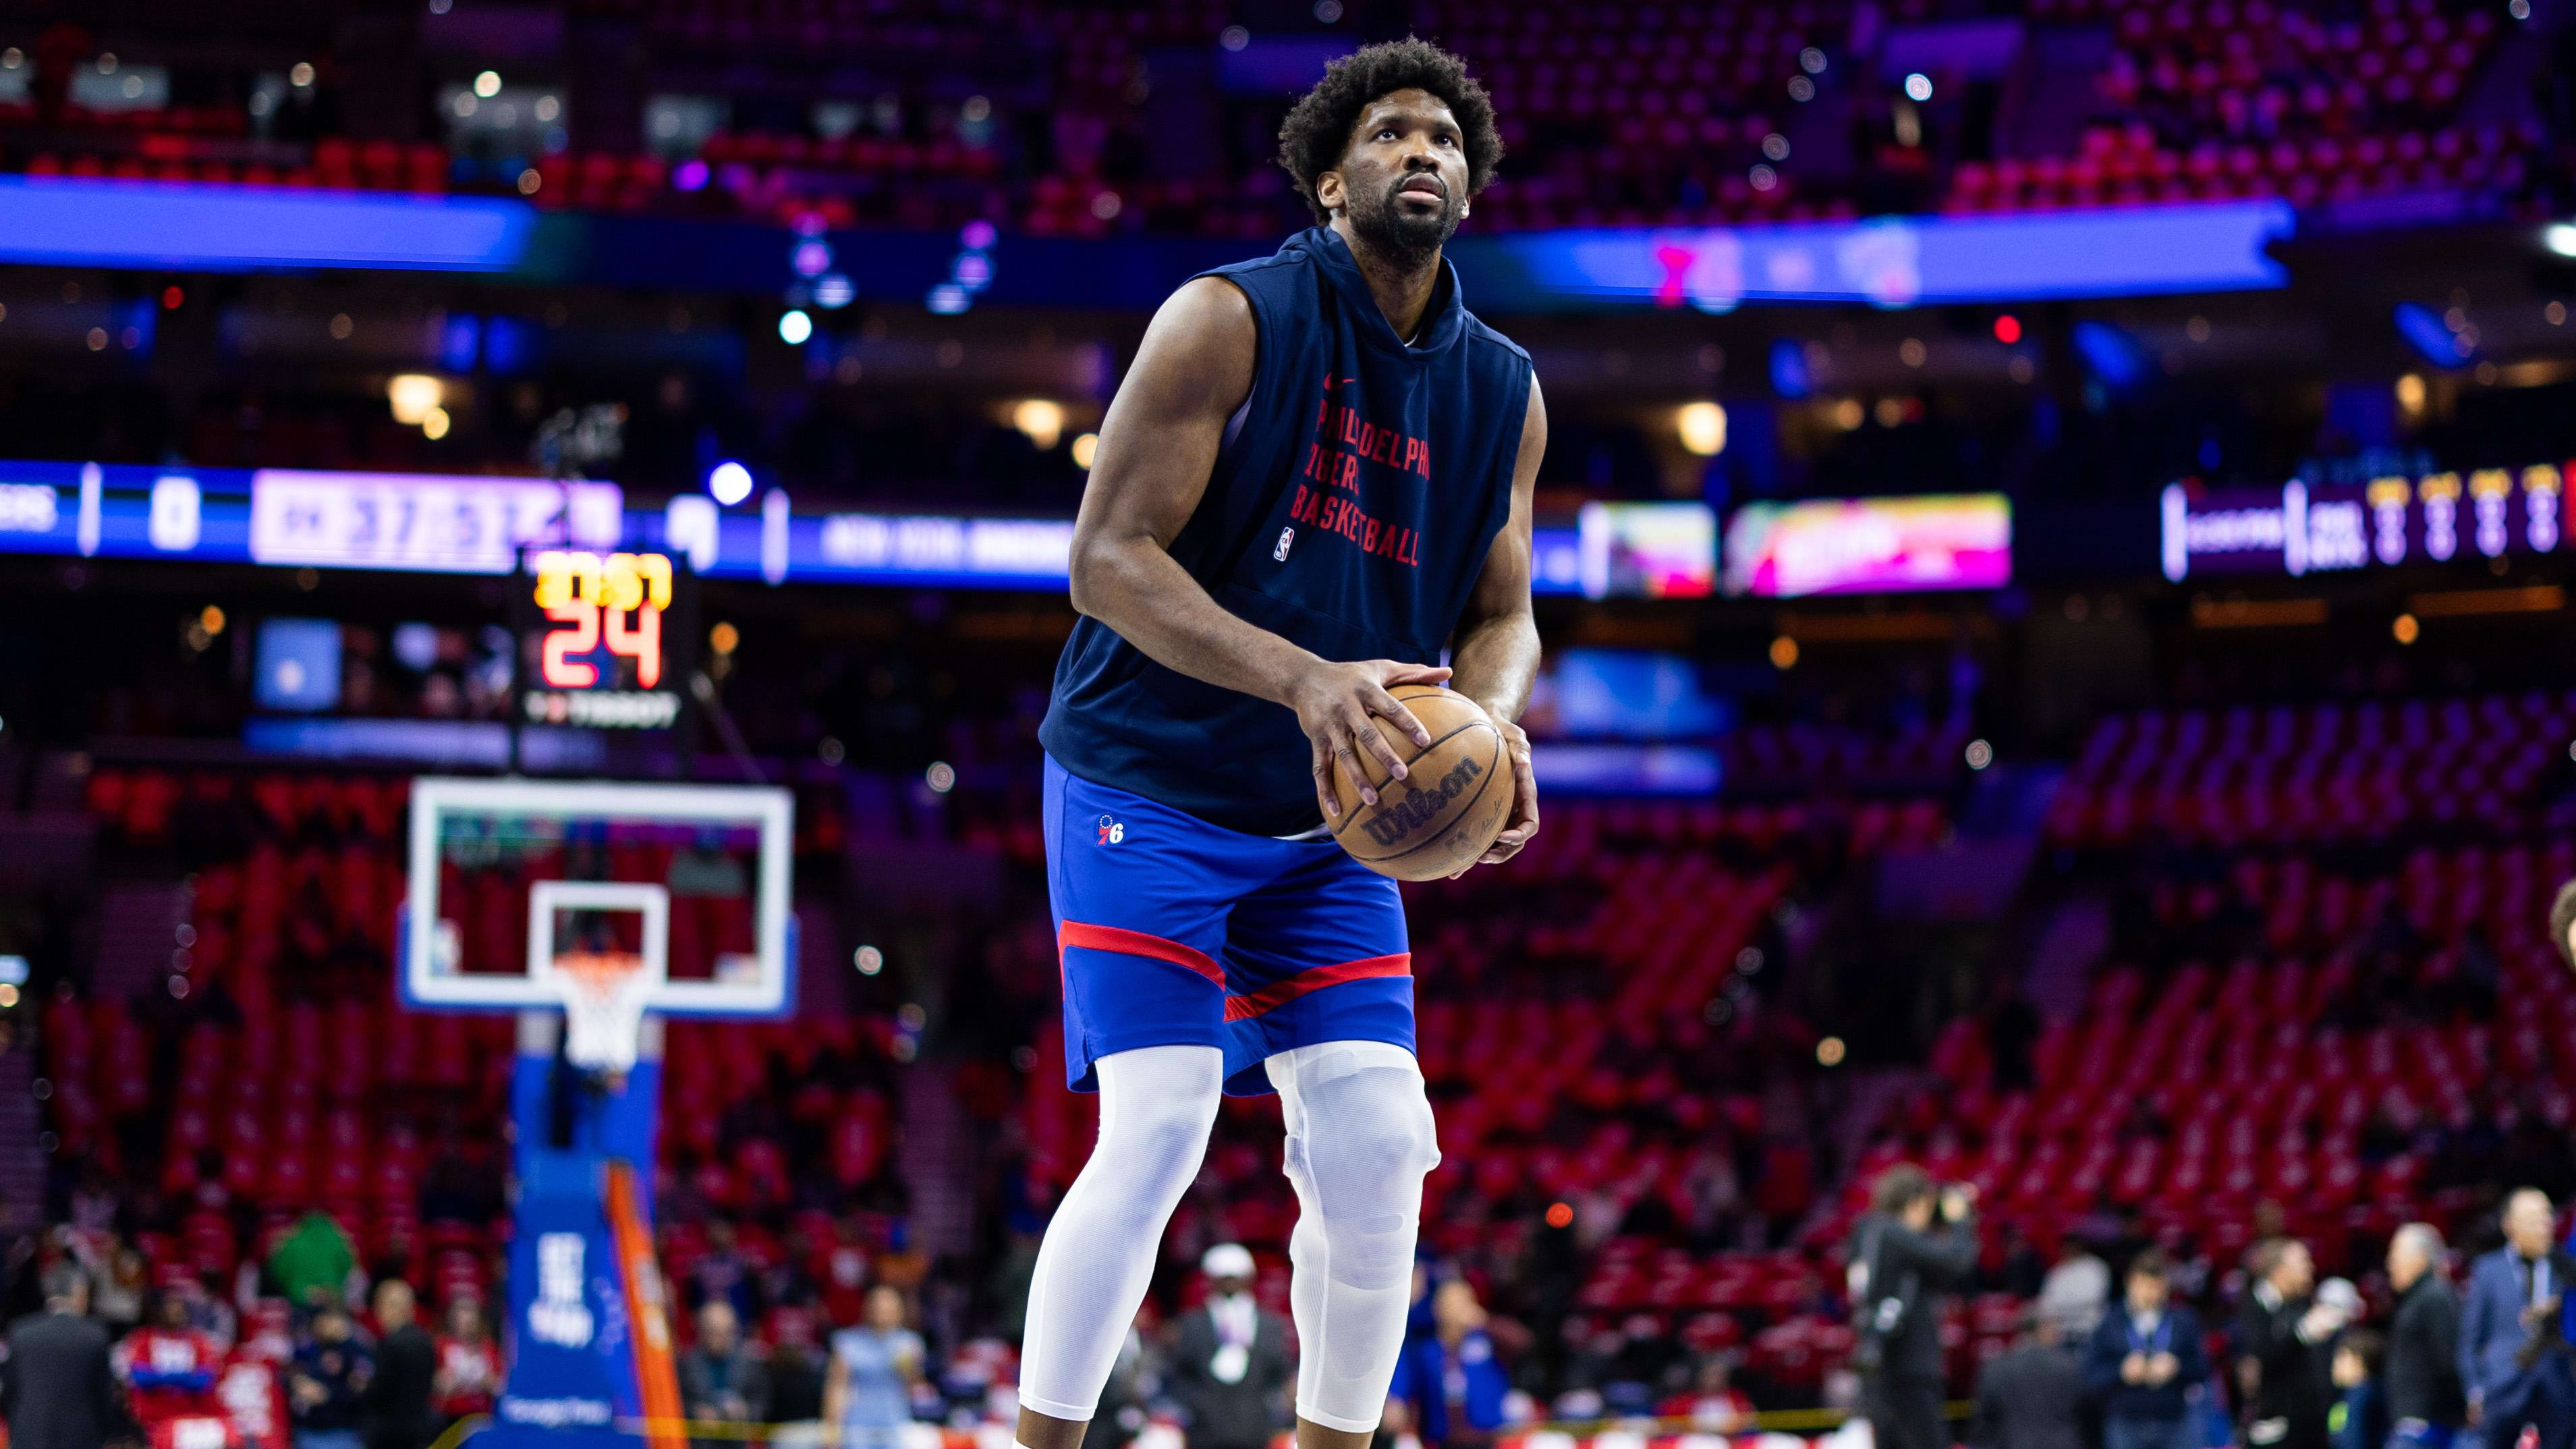 Embiid’s Secret Struggle: Overcoming Bell’s Palsy and Knee Injuries to Lead Sixers in Playoffs